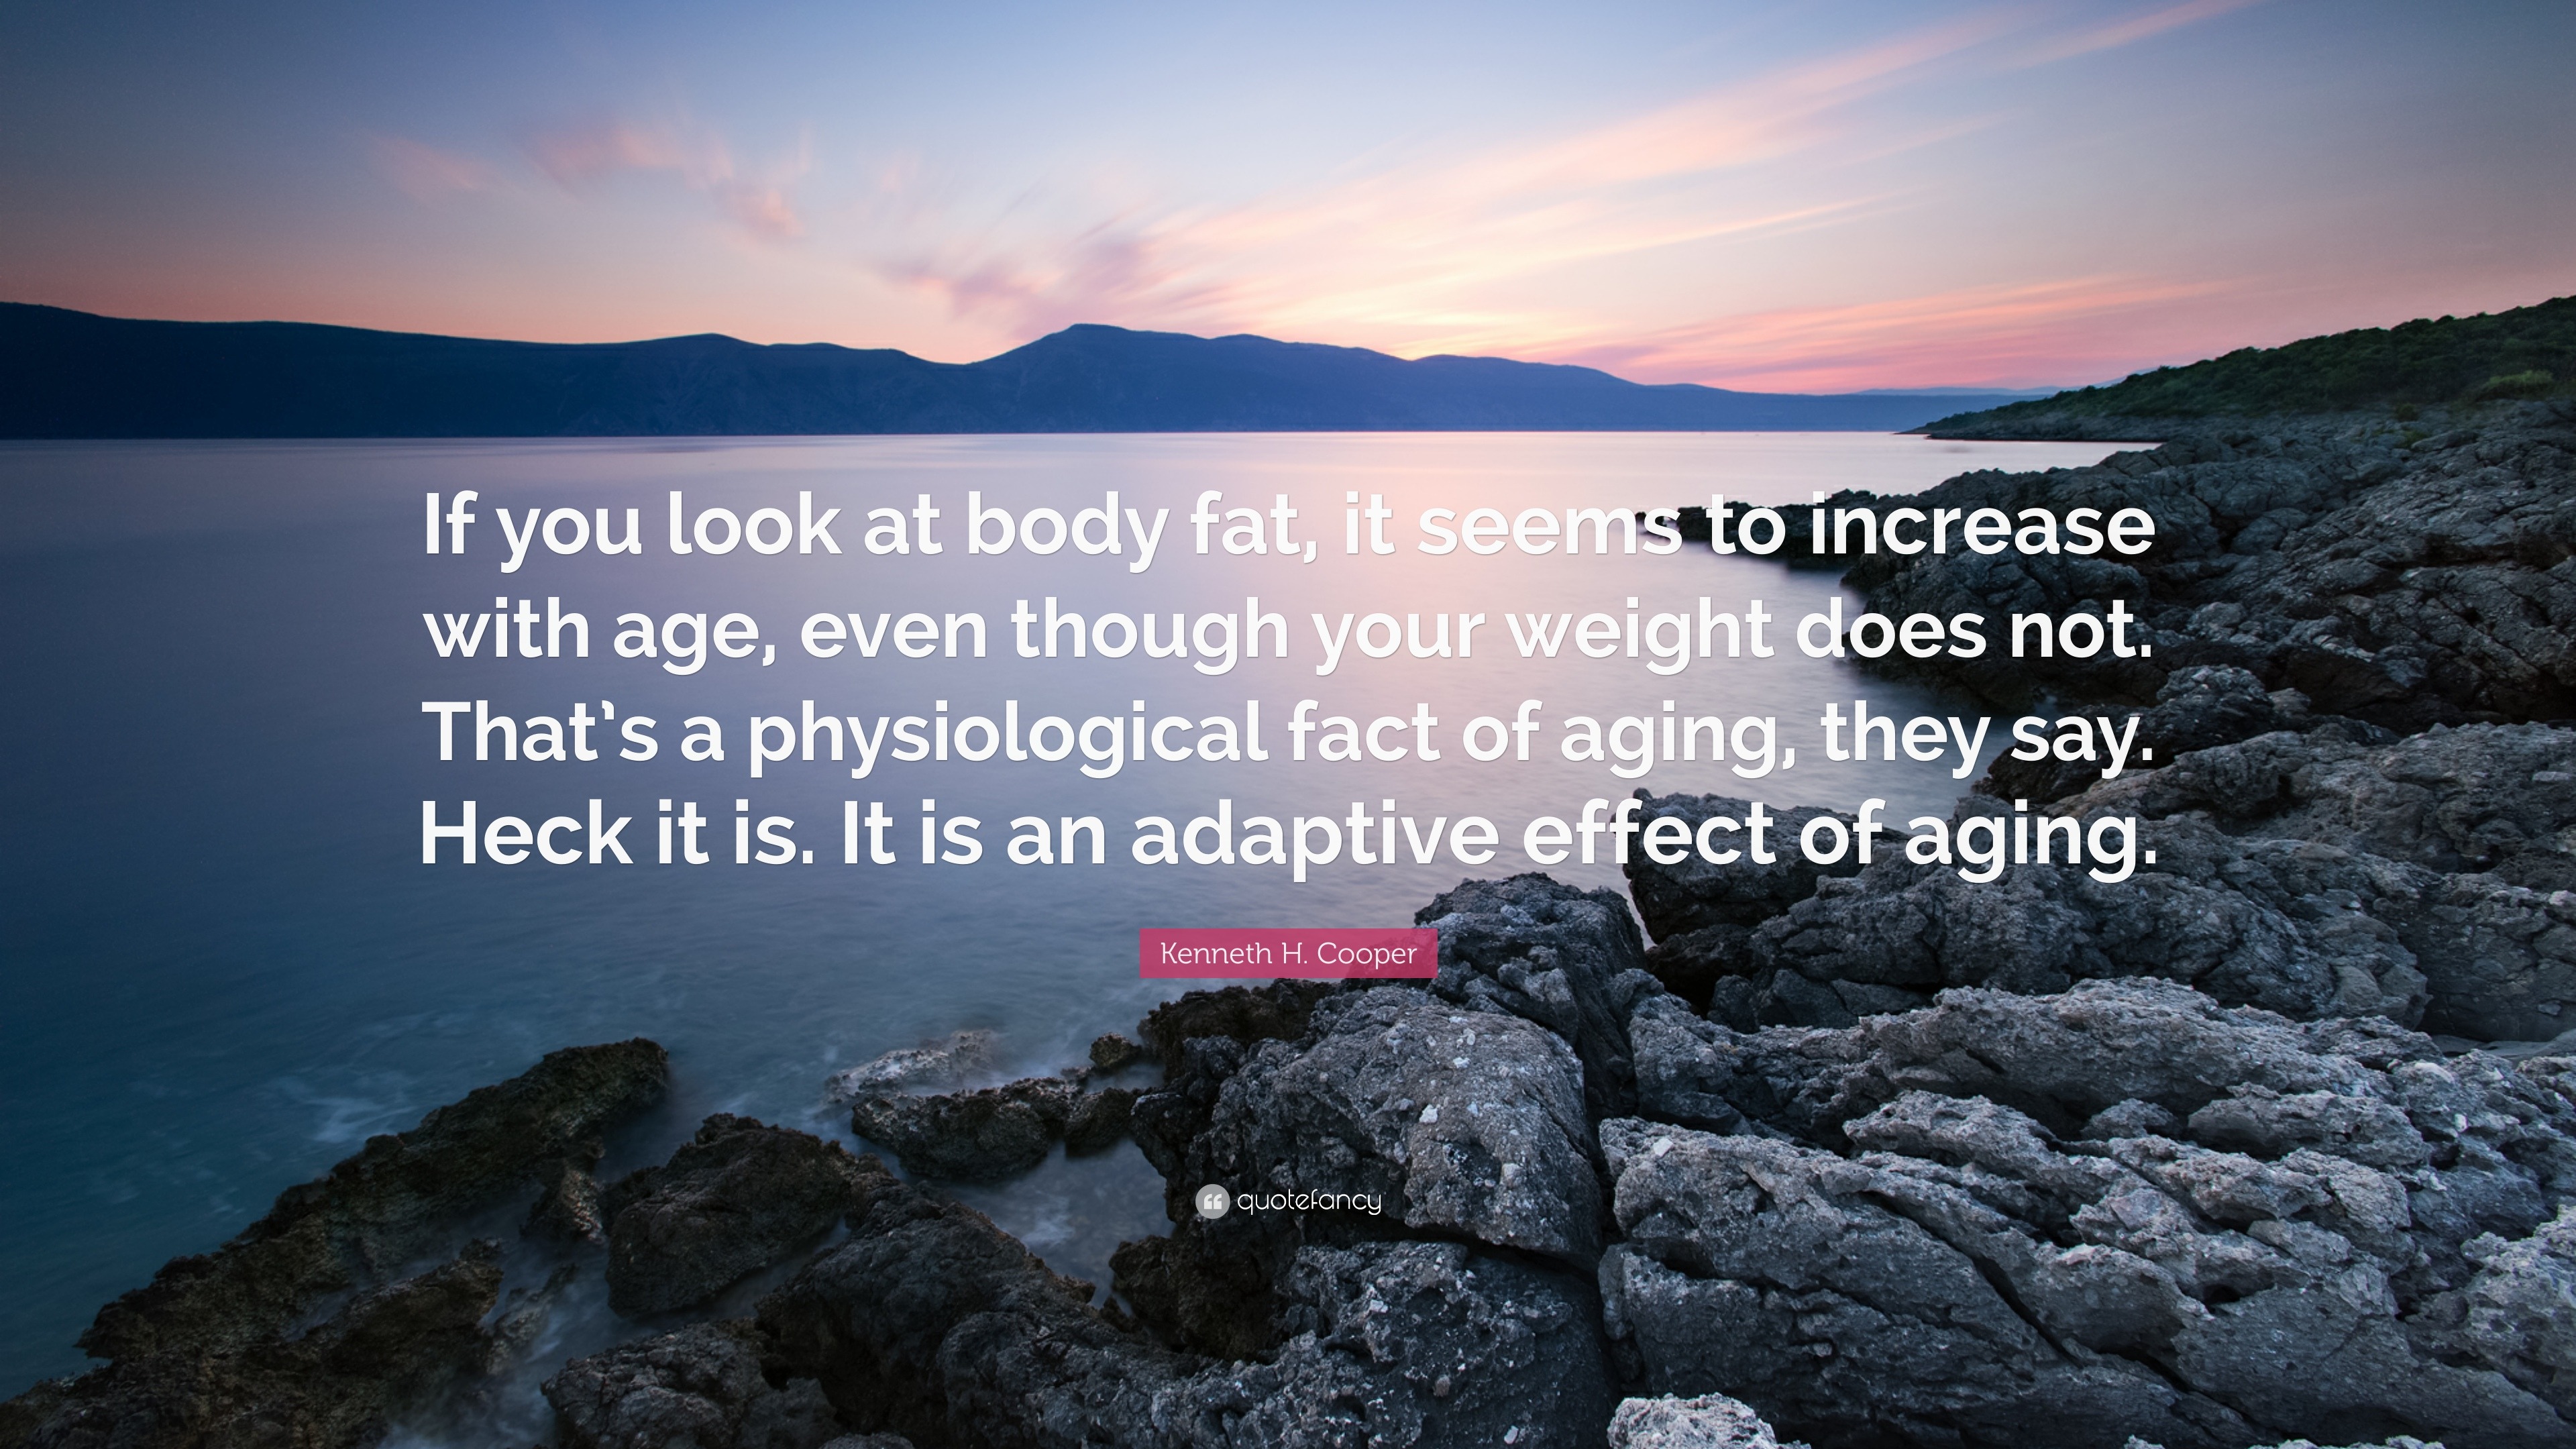 Weight & body fat - the facts